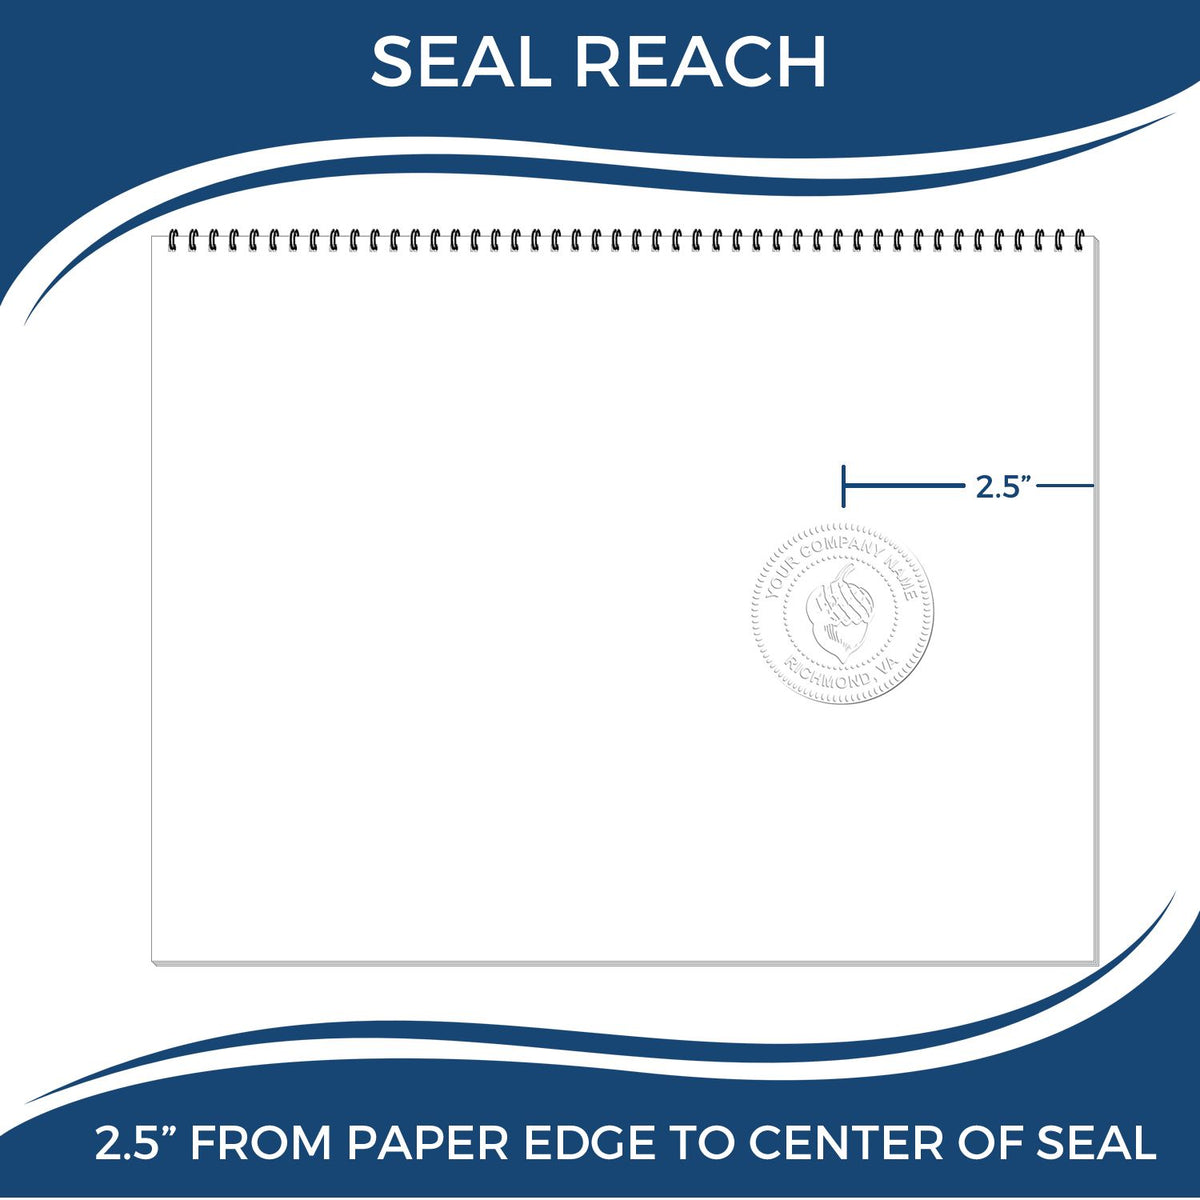 An infographic showing the seal reach which is represented by a ruler and a miniature seal image of the Long Reach Kentucky Land Surveyor Seal